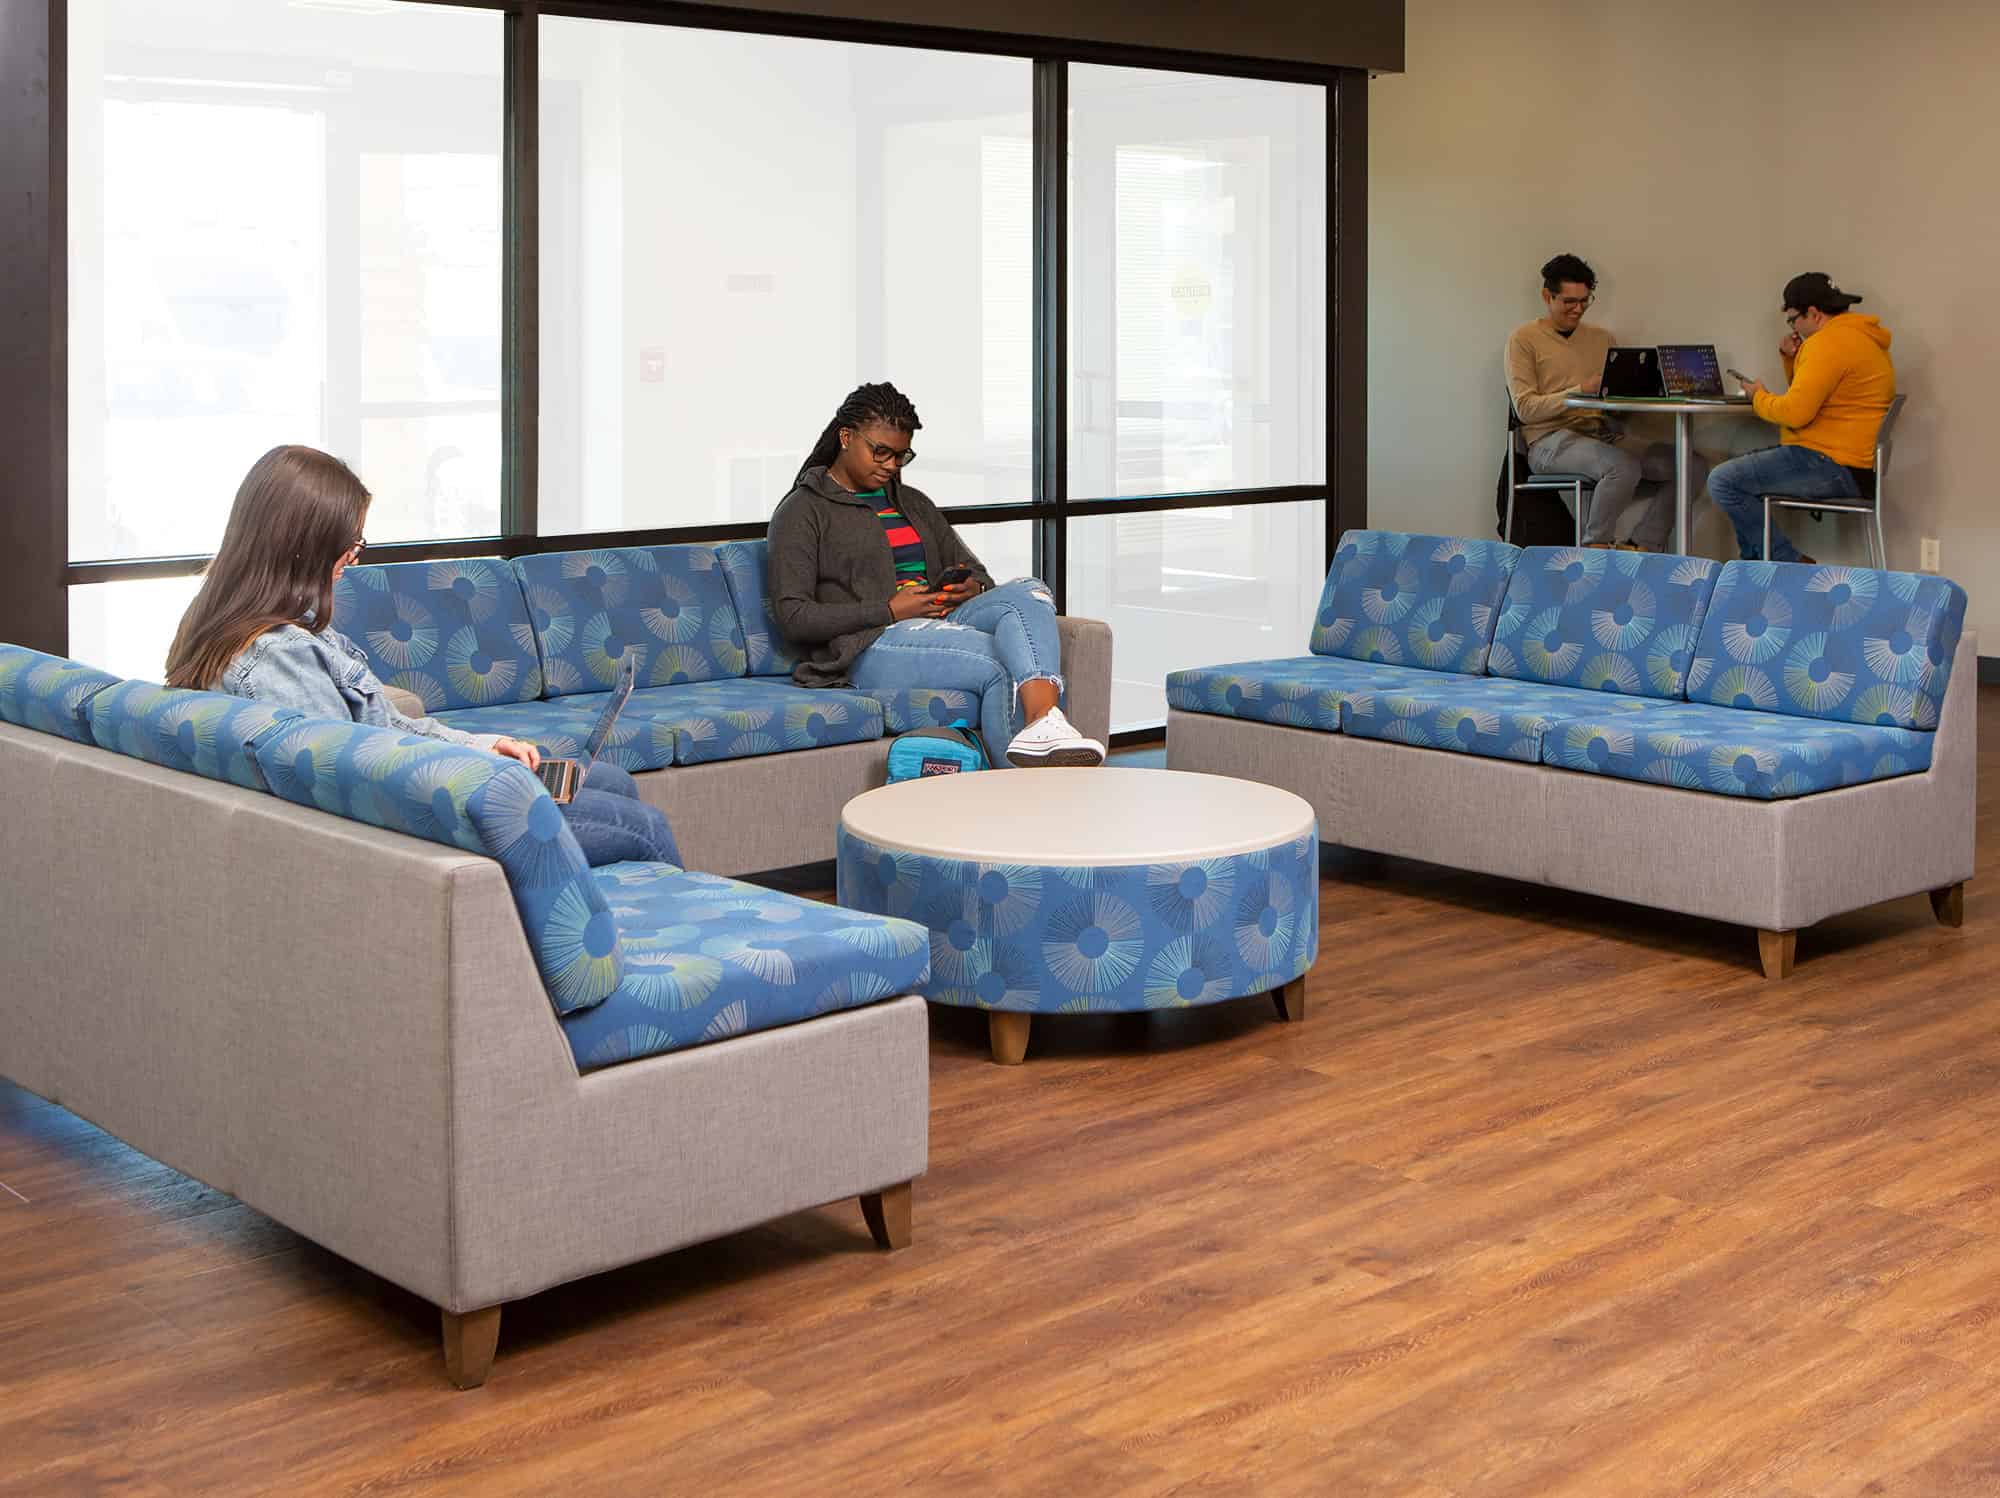 Students sitting in lounge area on Rally Modular Furniture while others study at a a Multi-Purpose Table while sitting in Barstools.